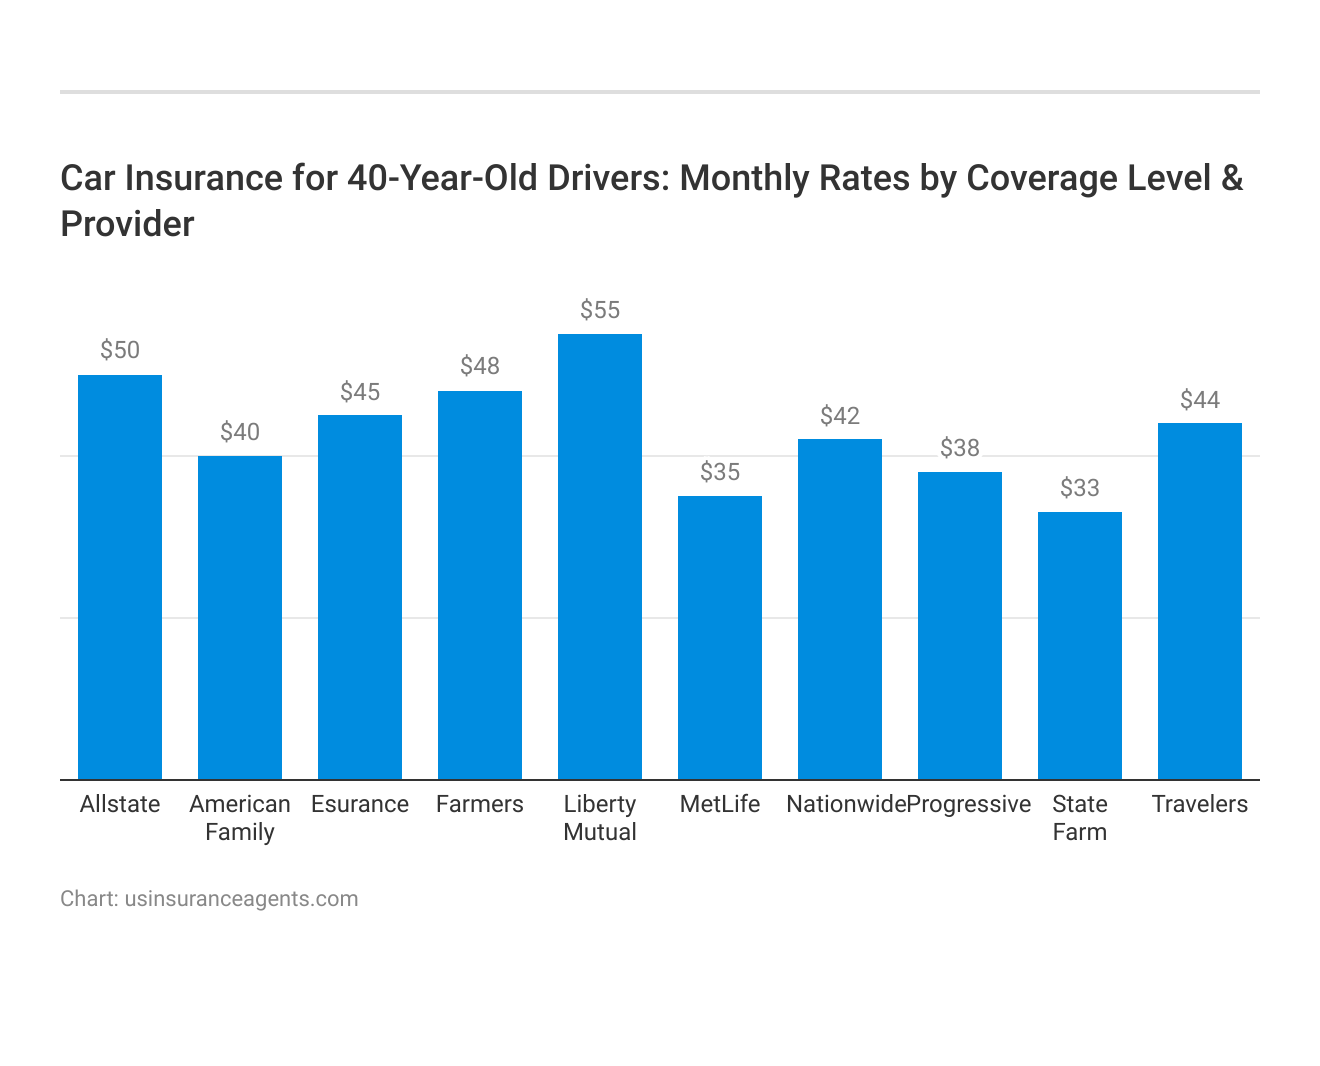 <h3>Car Insurance for 40-Year-Old Drivers: Monthly Rates by Coverage Level & Provider</h3>